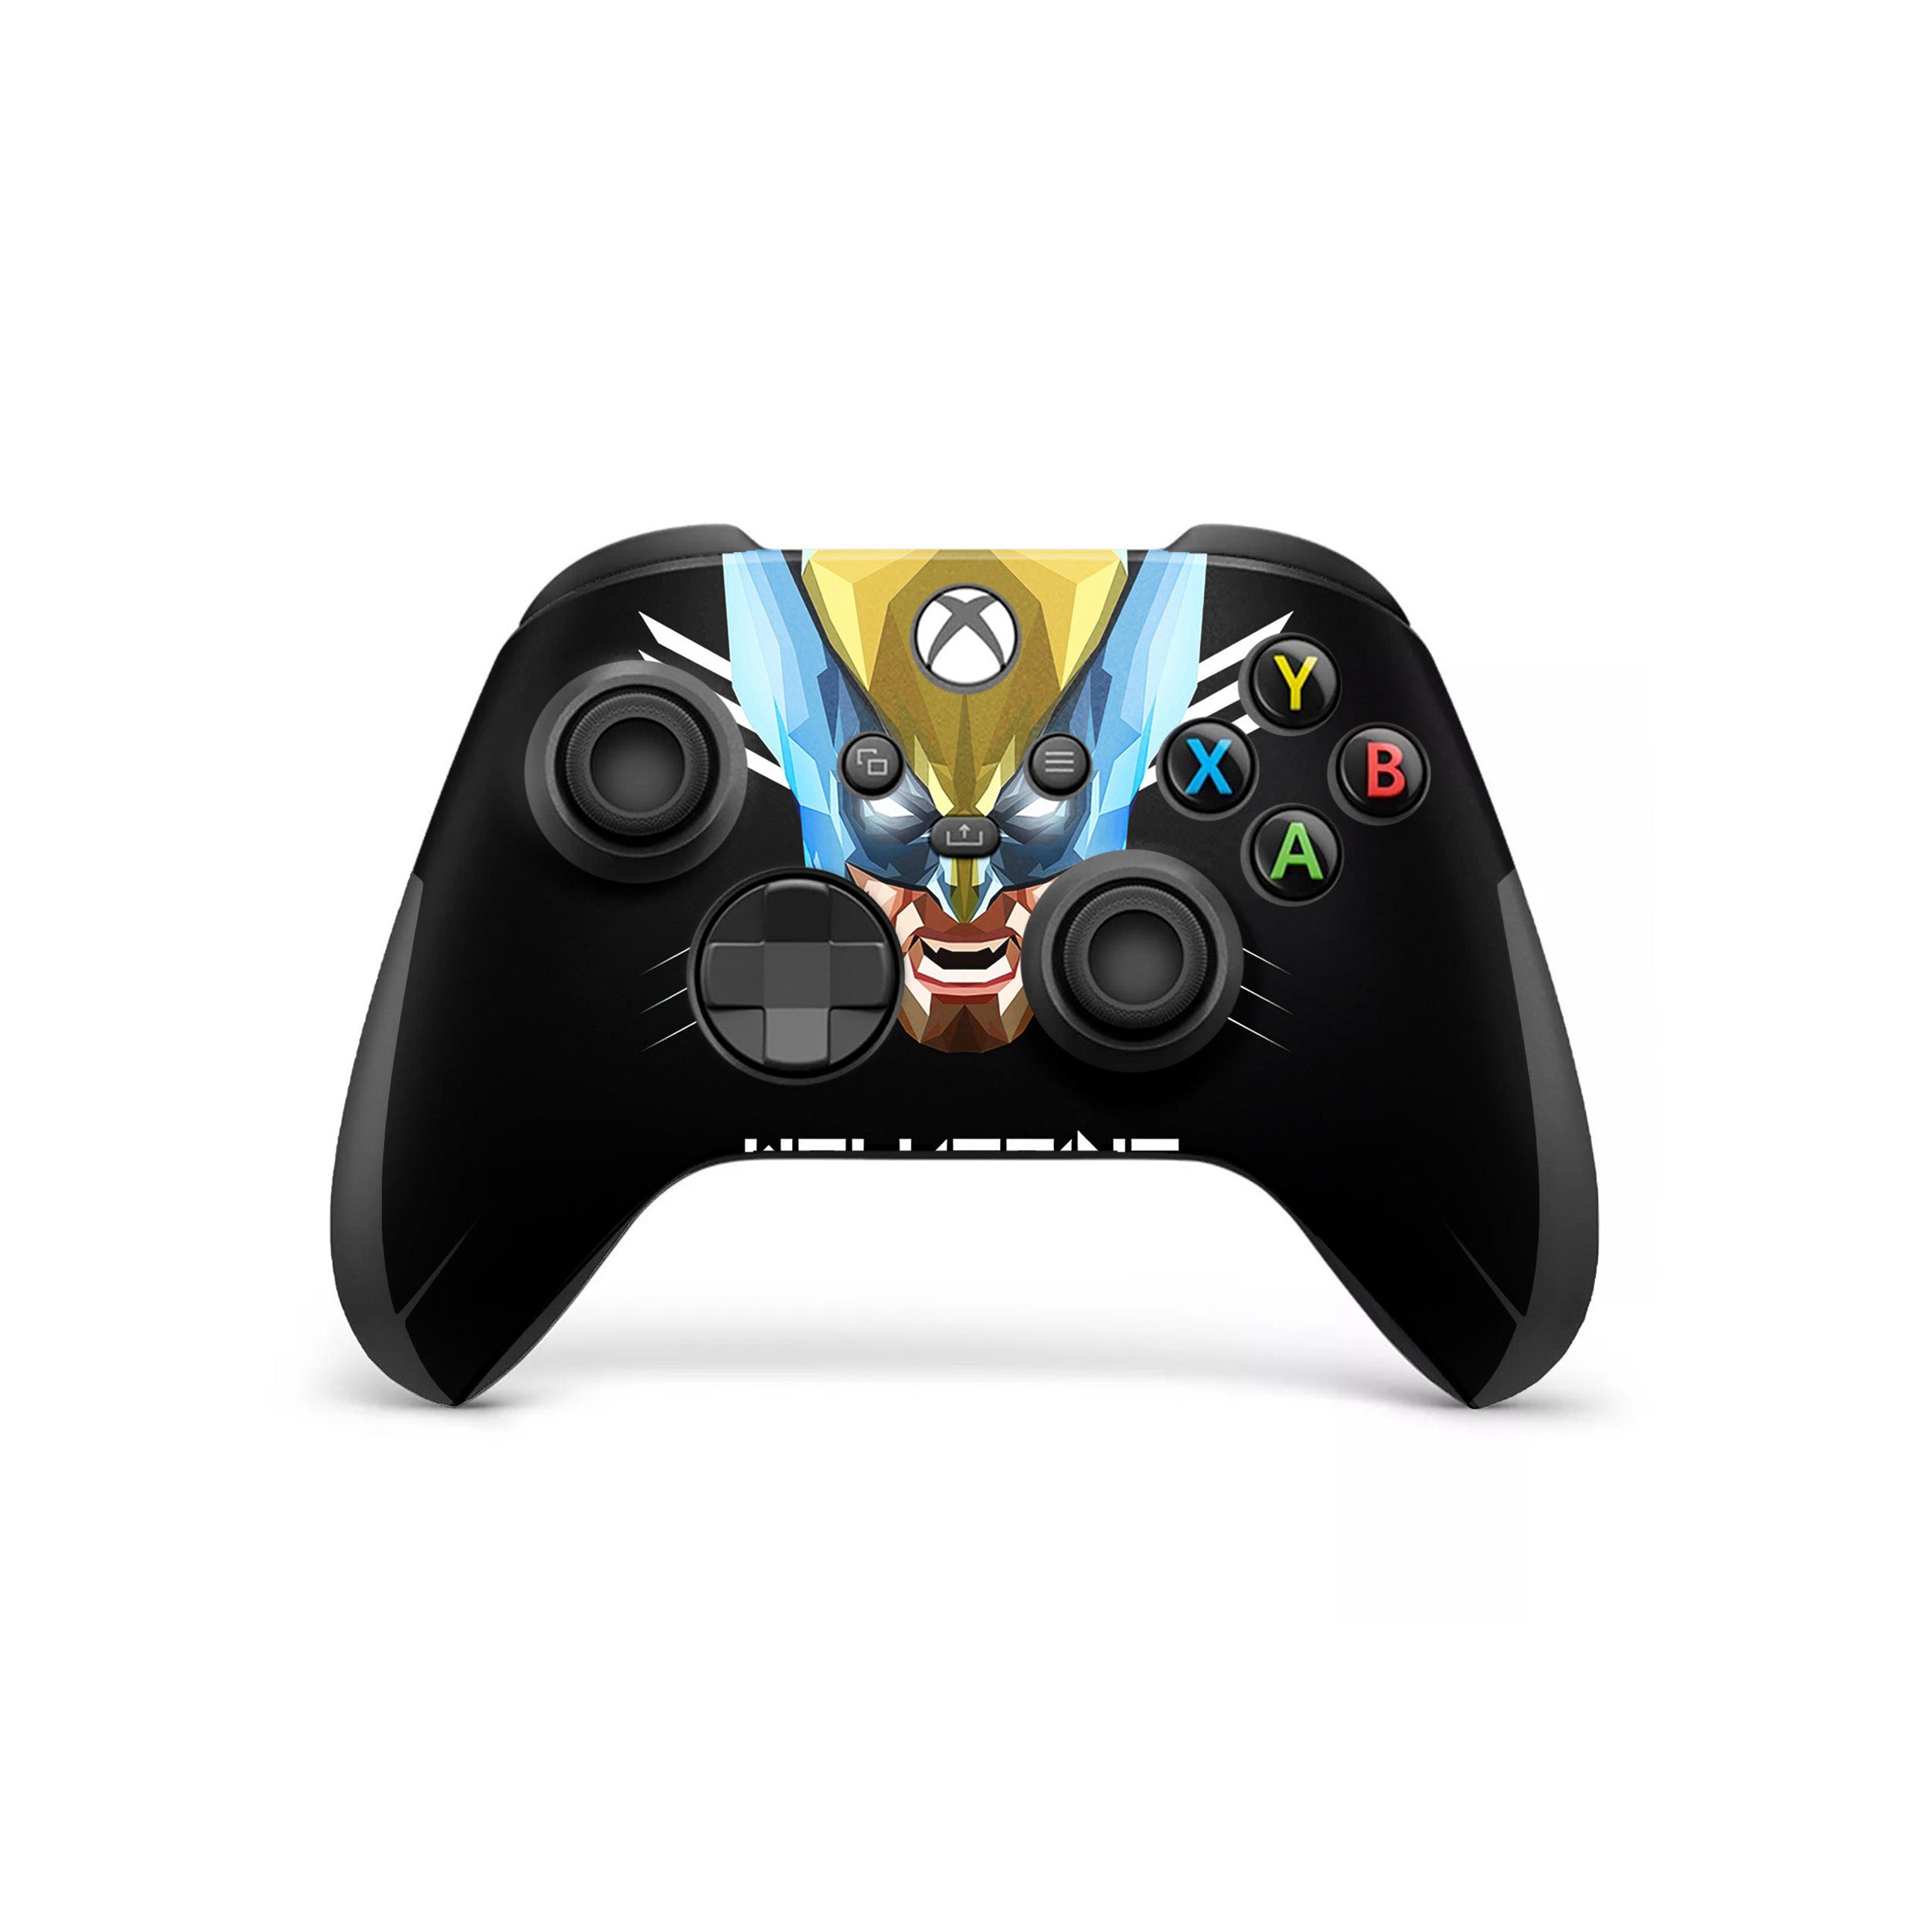 A video game skin featuring a Marvel Comics X Men Wolverine design for the Xbox Wireless Controller.